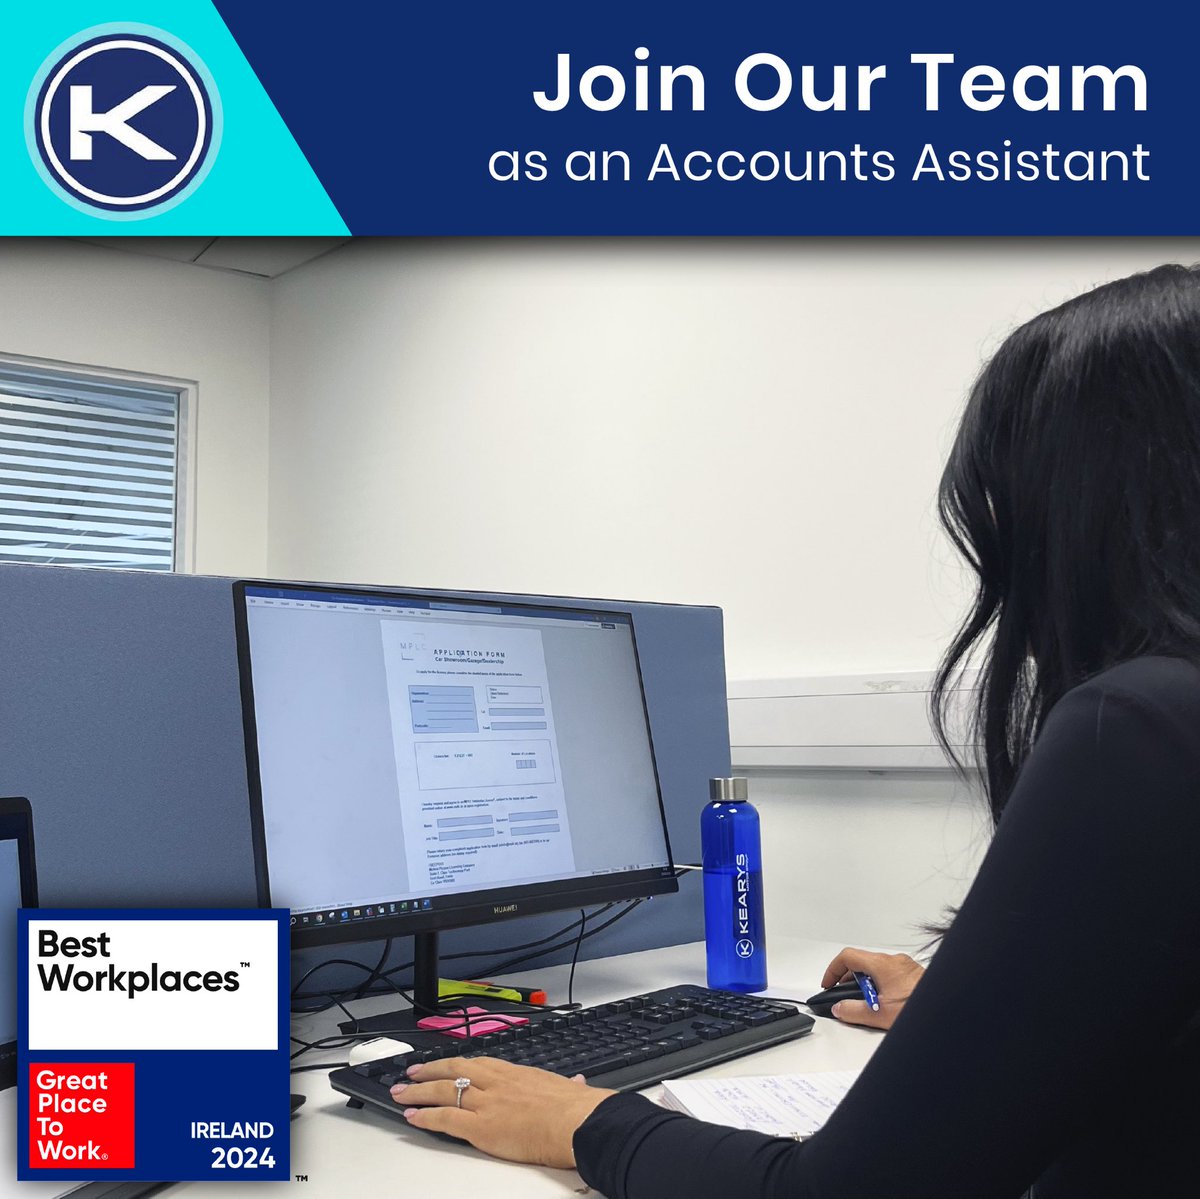 Kearys Motor Group is looking for top calibre candidates to join its winning team. We are currently recruiting an Accounts Assistant to join our team based in BMW, Little Island, Cork. Looking to move your career into next gear? Apply today: kearys.bamboohr.com/careers/77 #hiring